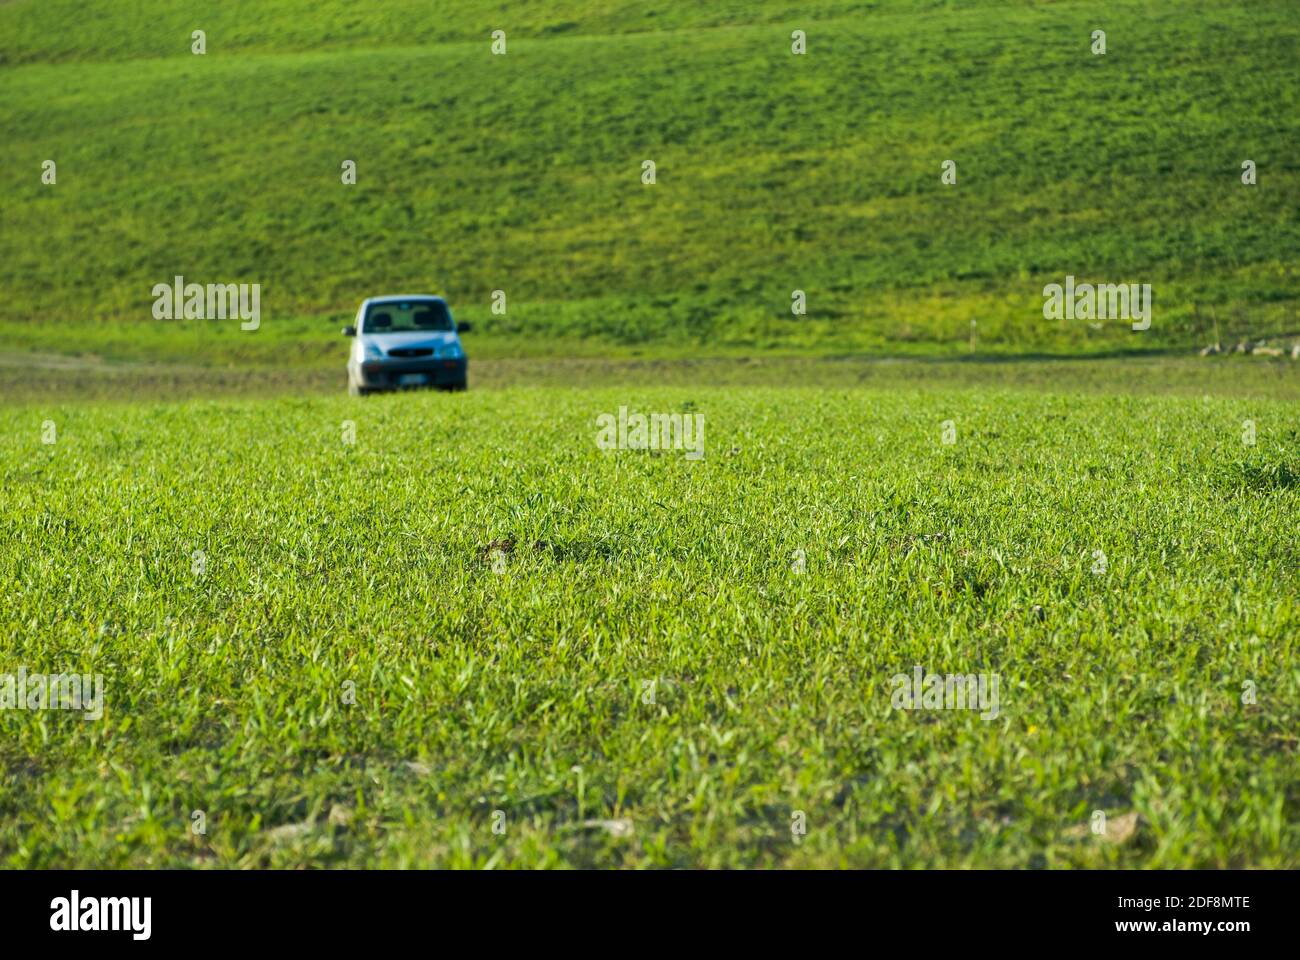 selective focus of green grass on background blurred car Stock Photo